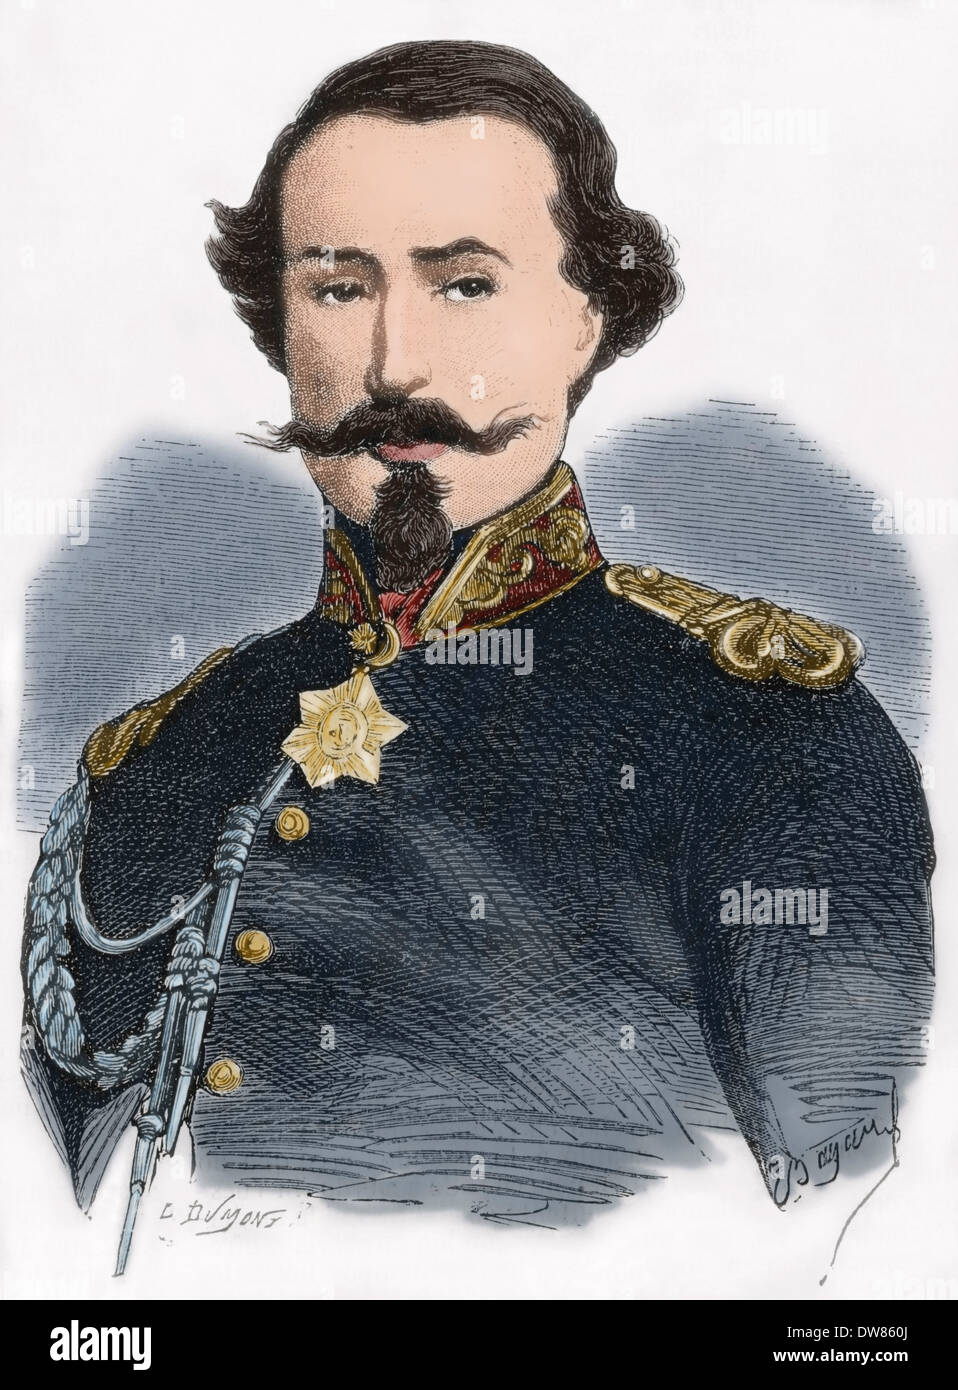 Alfonso La Marmora (1804-1878). Italian military and statesman. Prime Minister of Italy. Engraving. Colored. Stock Photo